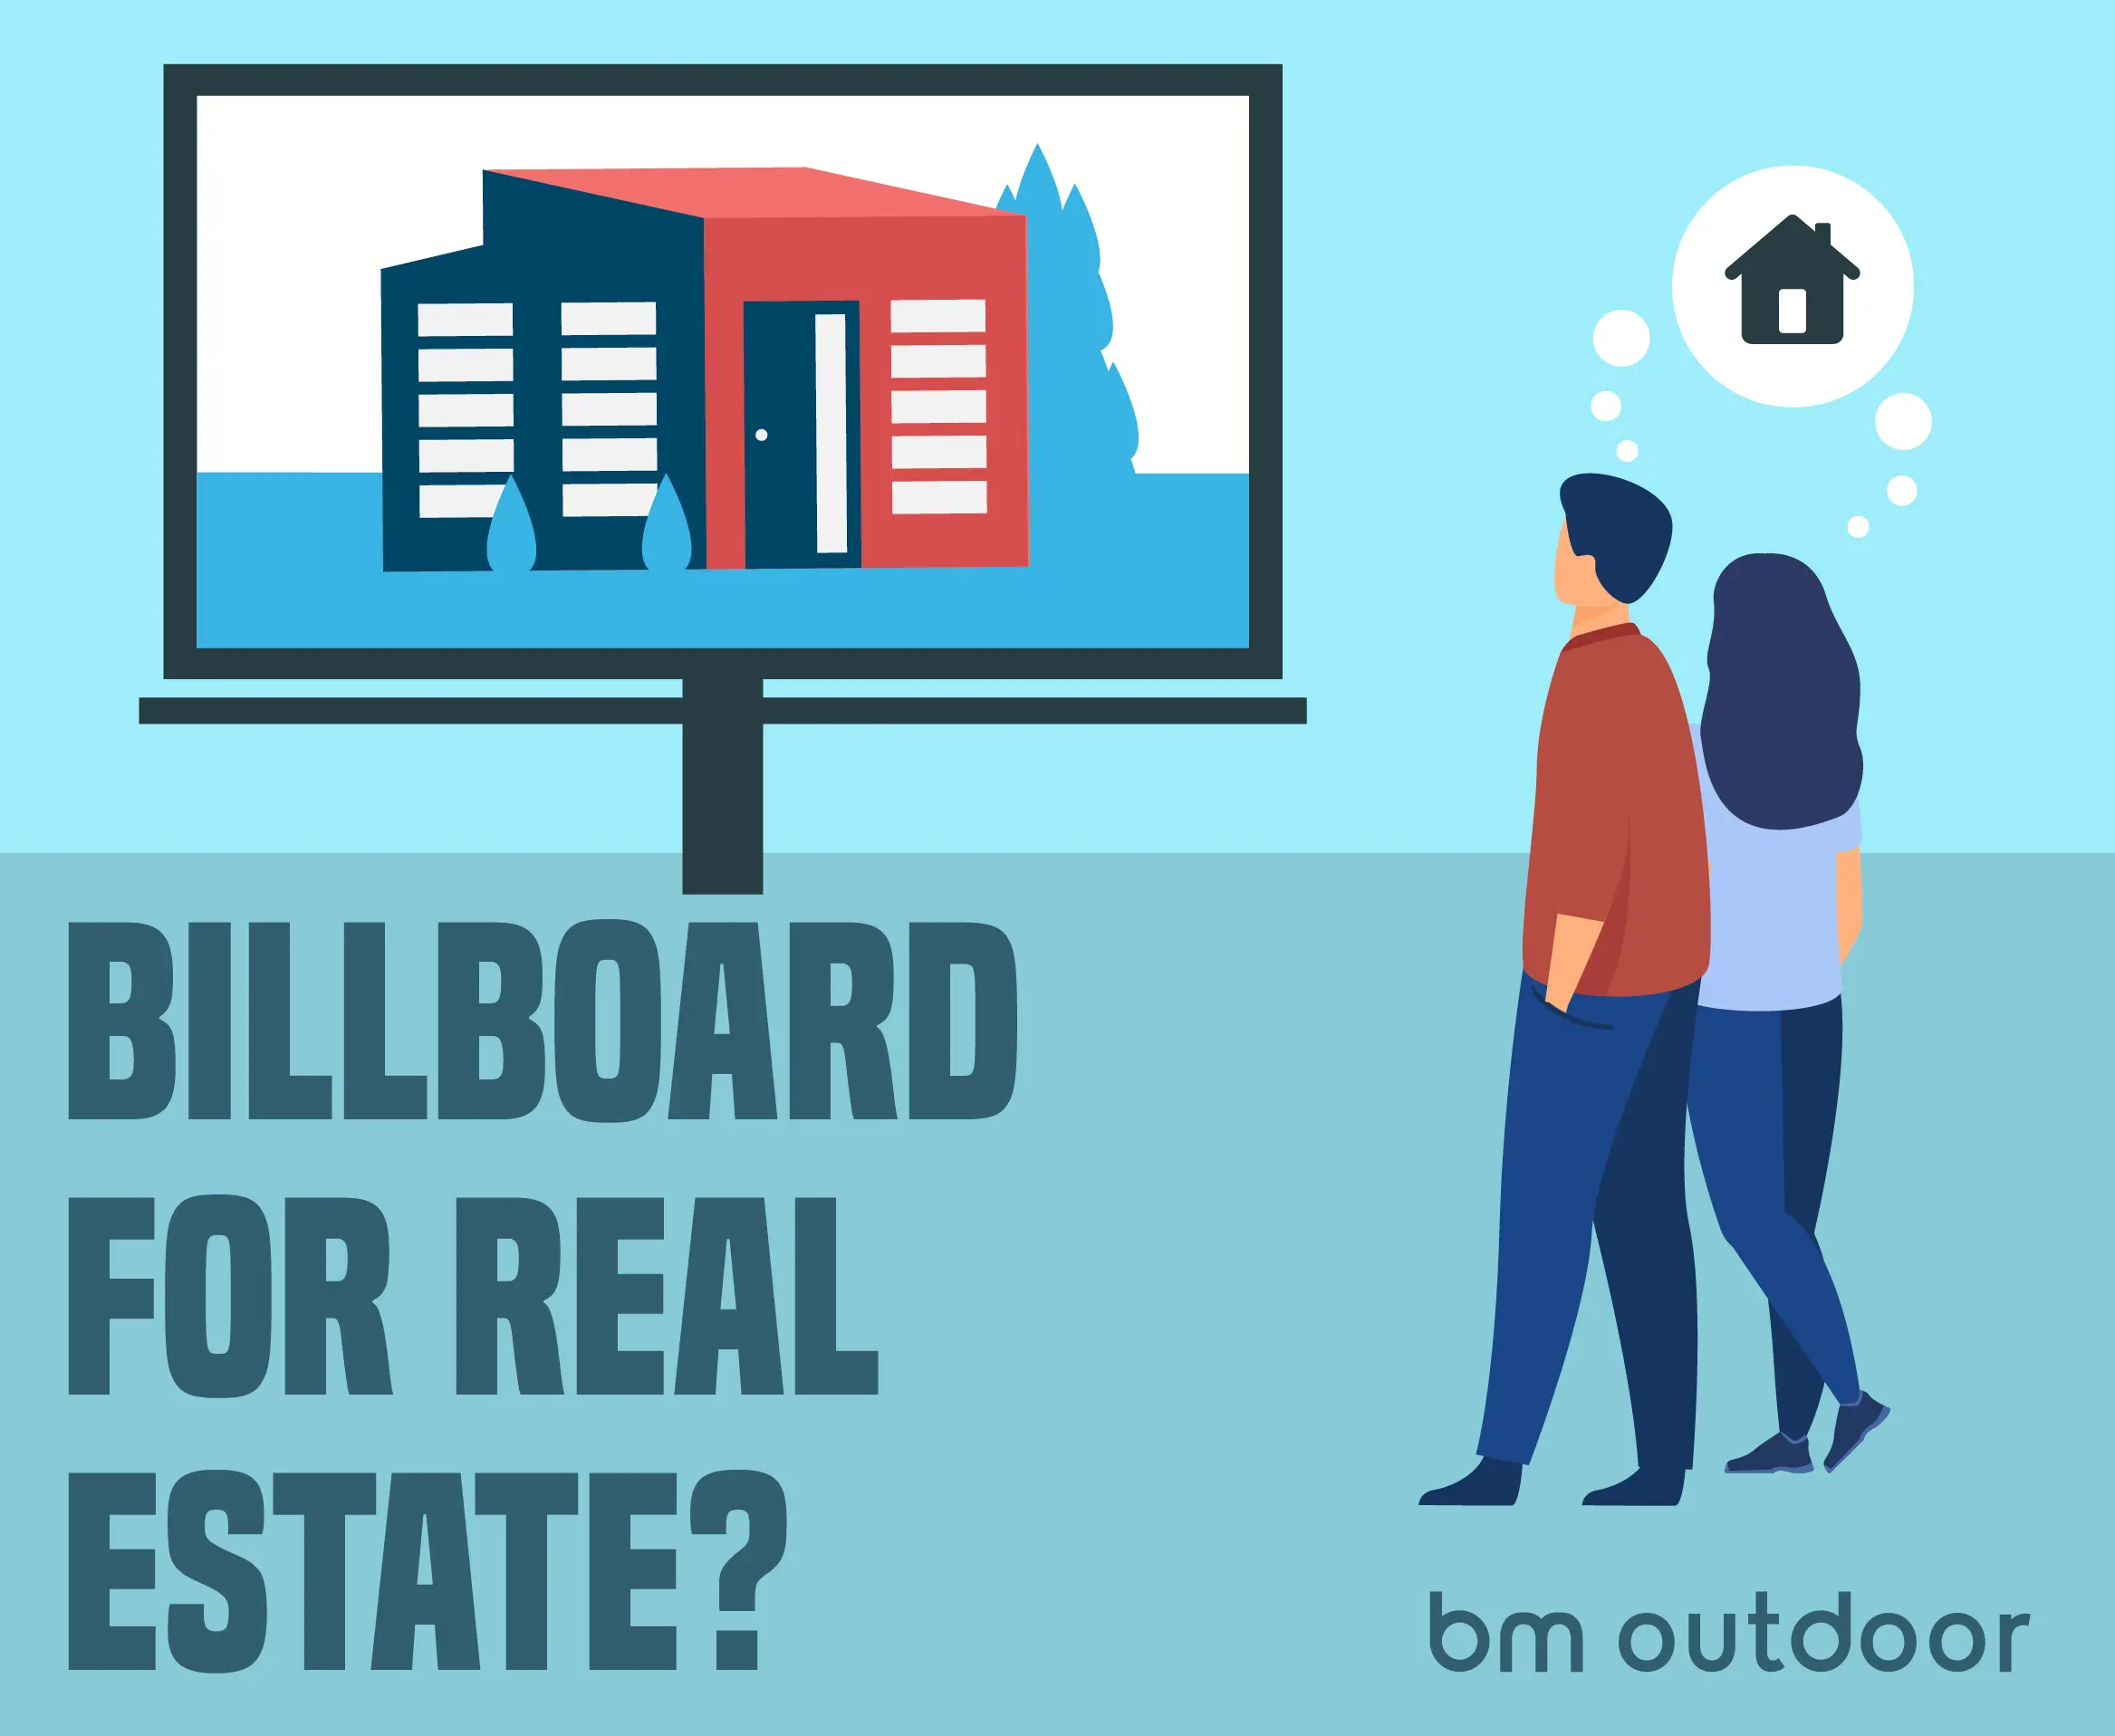 illboard for Real Estate?